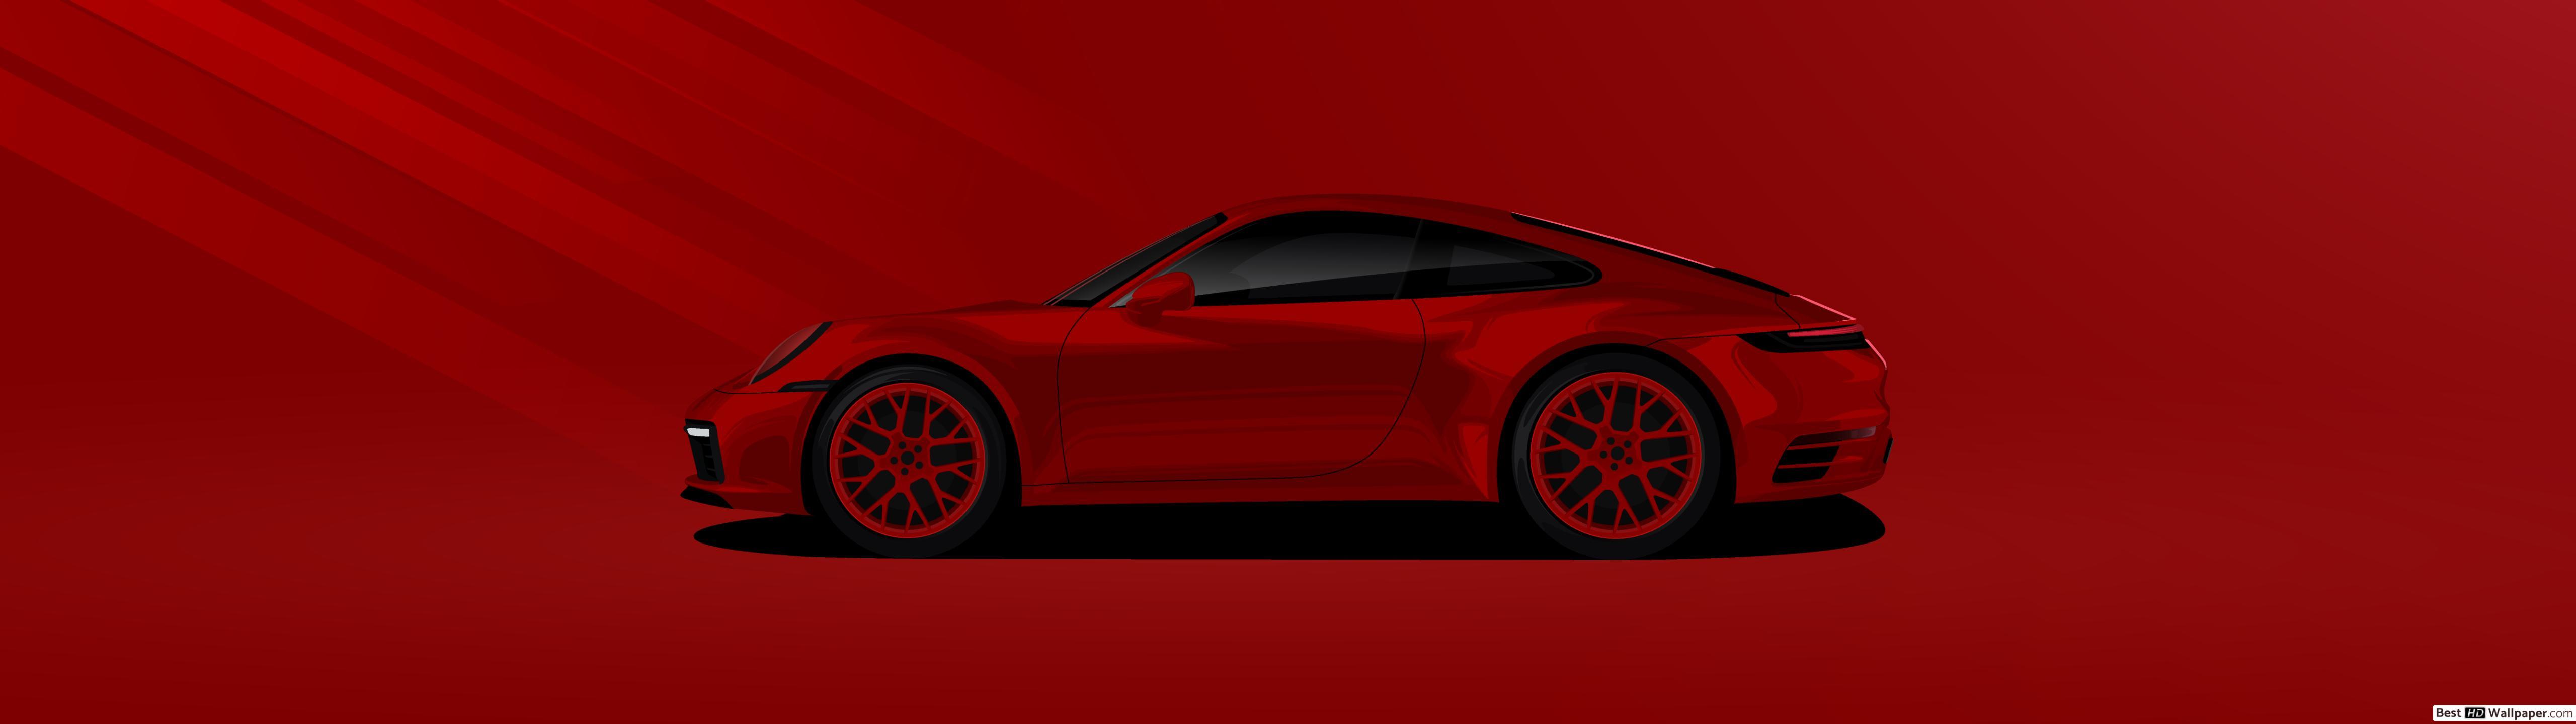 5120x1440 Car Wallpapers - Top Free 5120x1440 Car Backgrounds